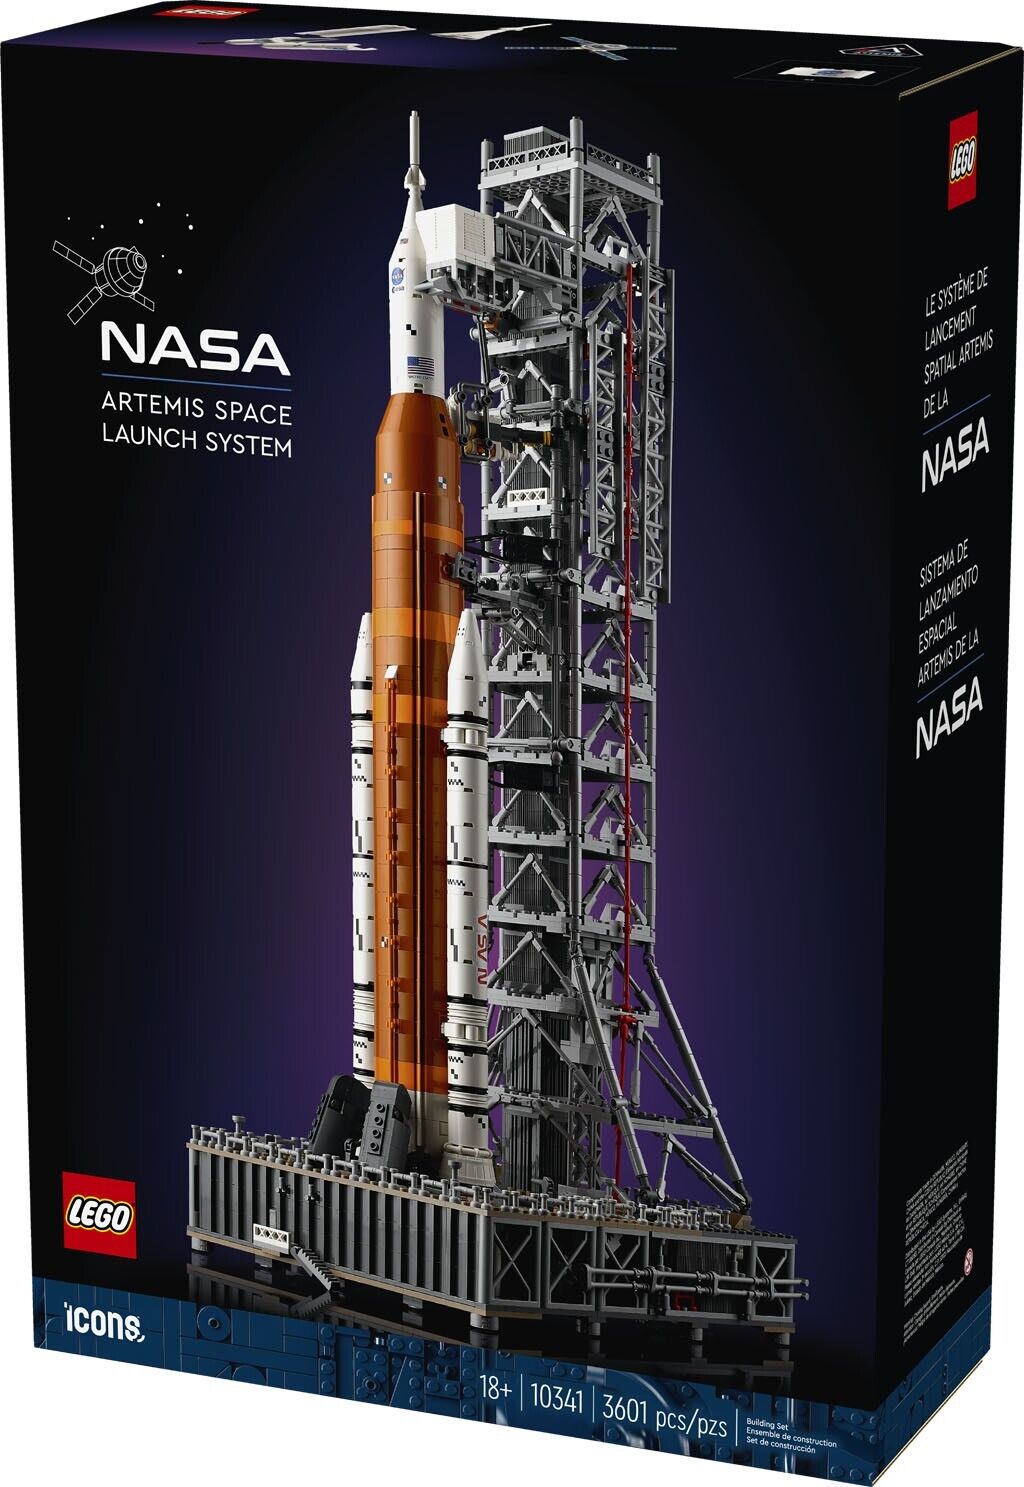 PREORDER Lego 10341 Artemis Space Launch System